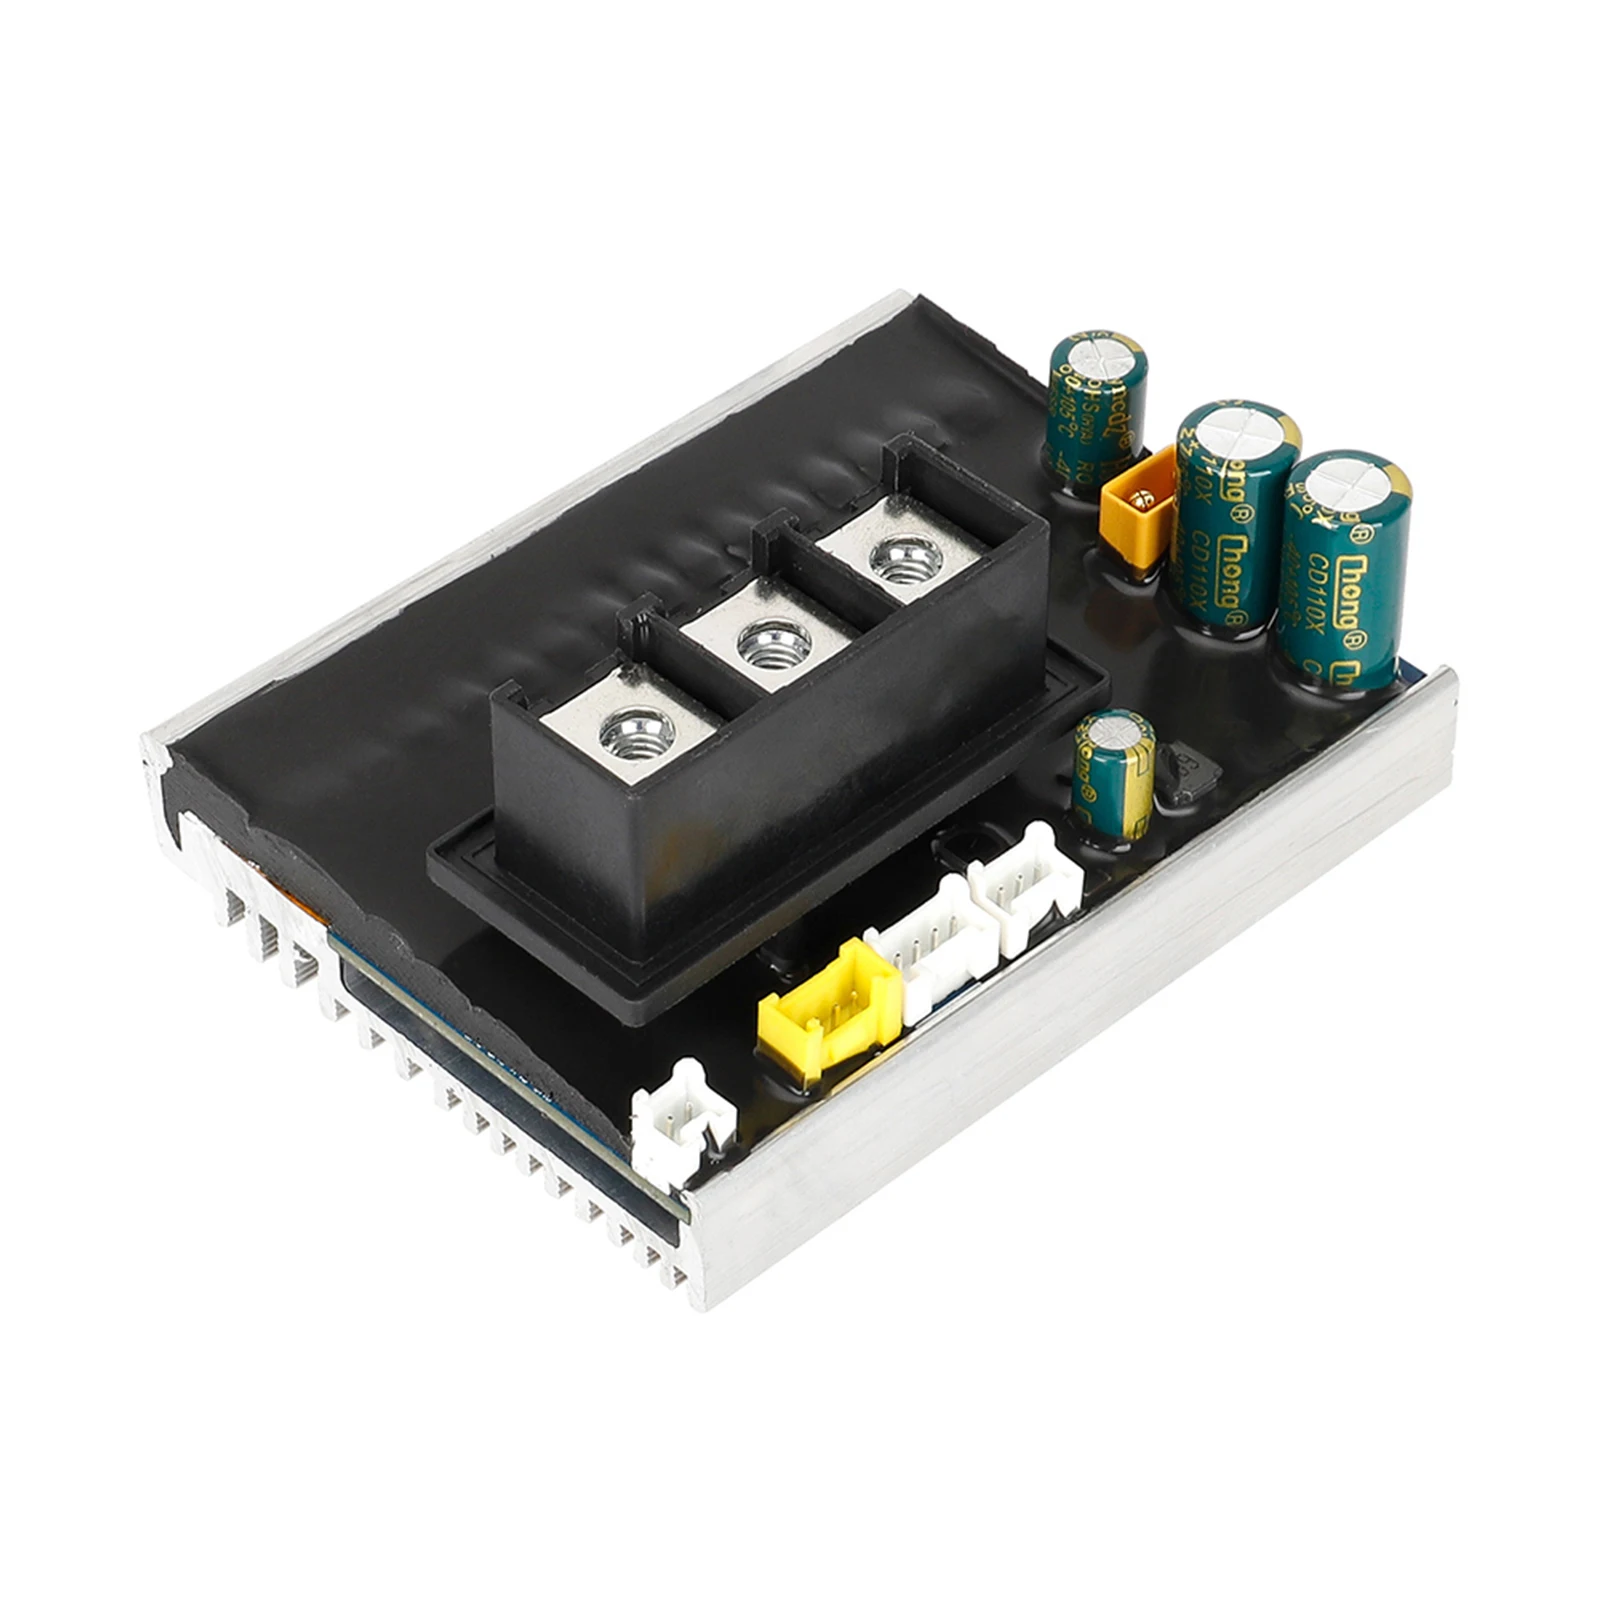 

Replace Your Old or Defective Main Circuit Board Controller with this For Ninebot F20F30F40 Electric Scooter Controller